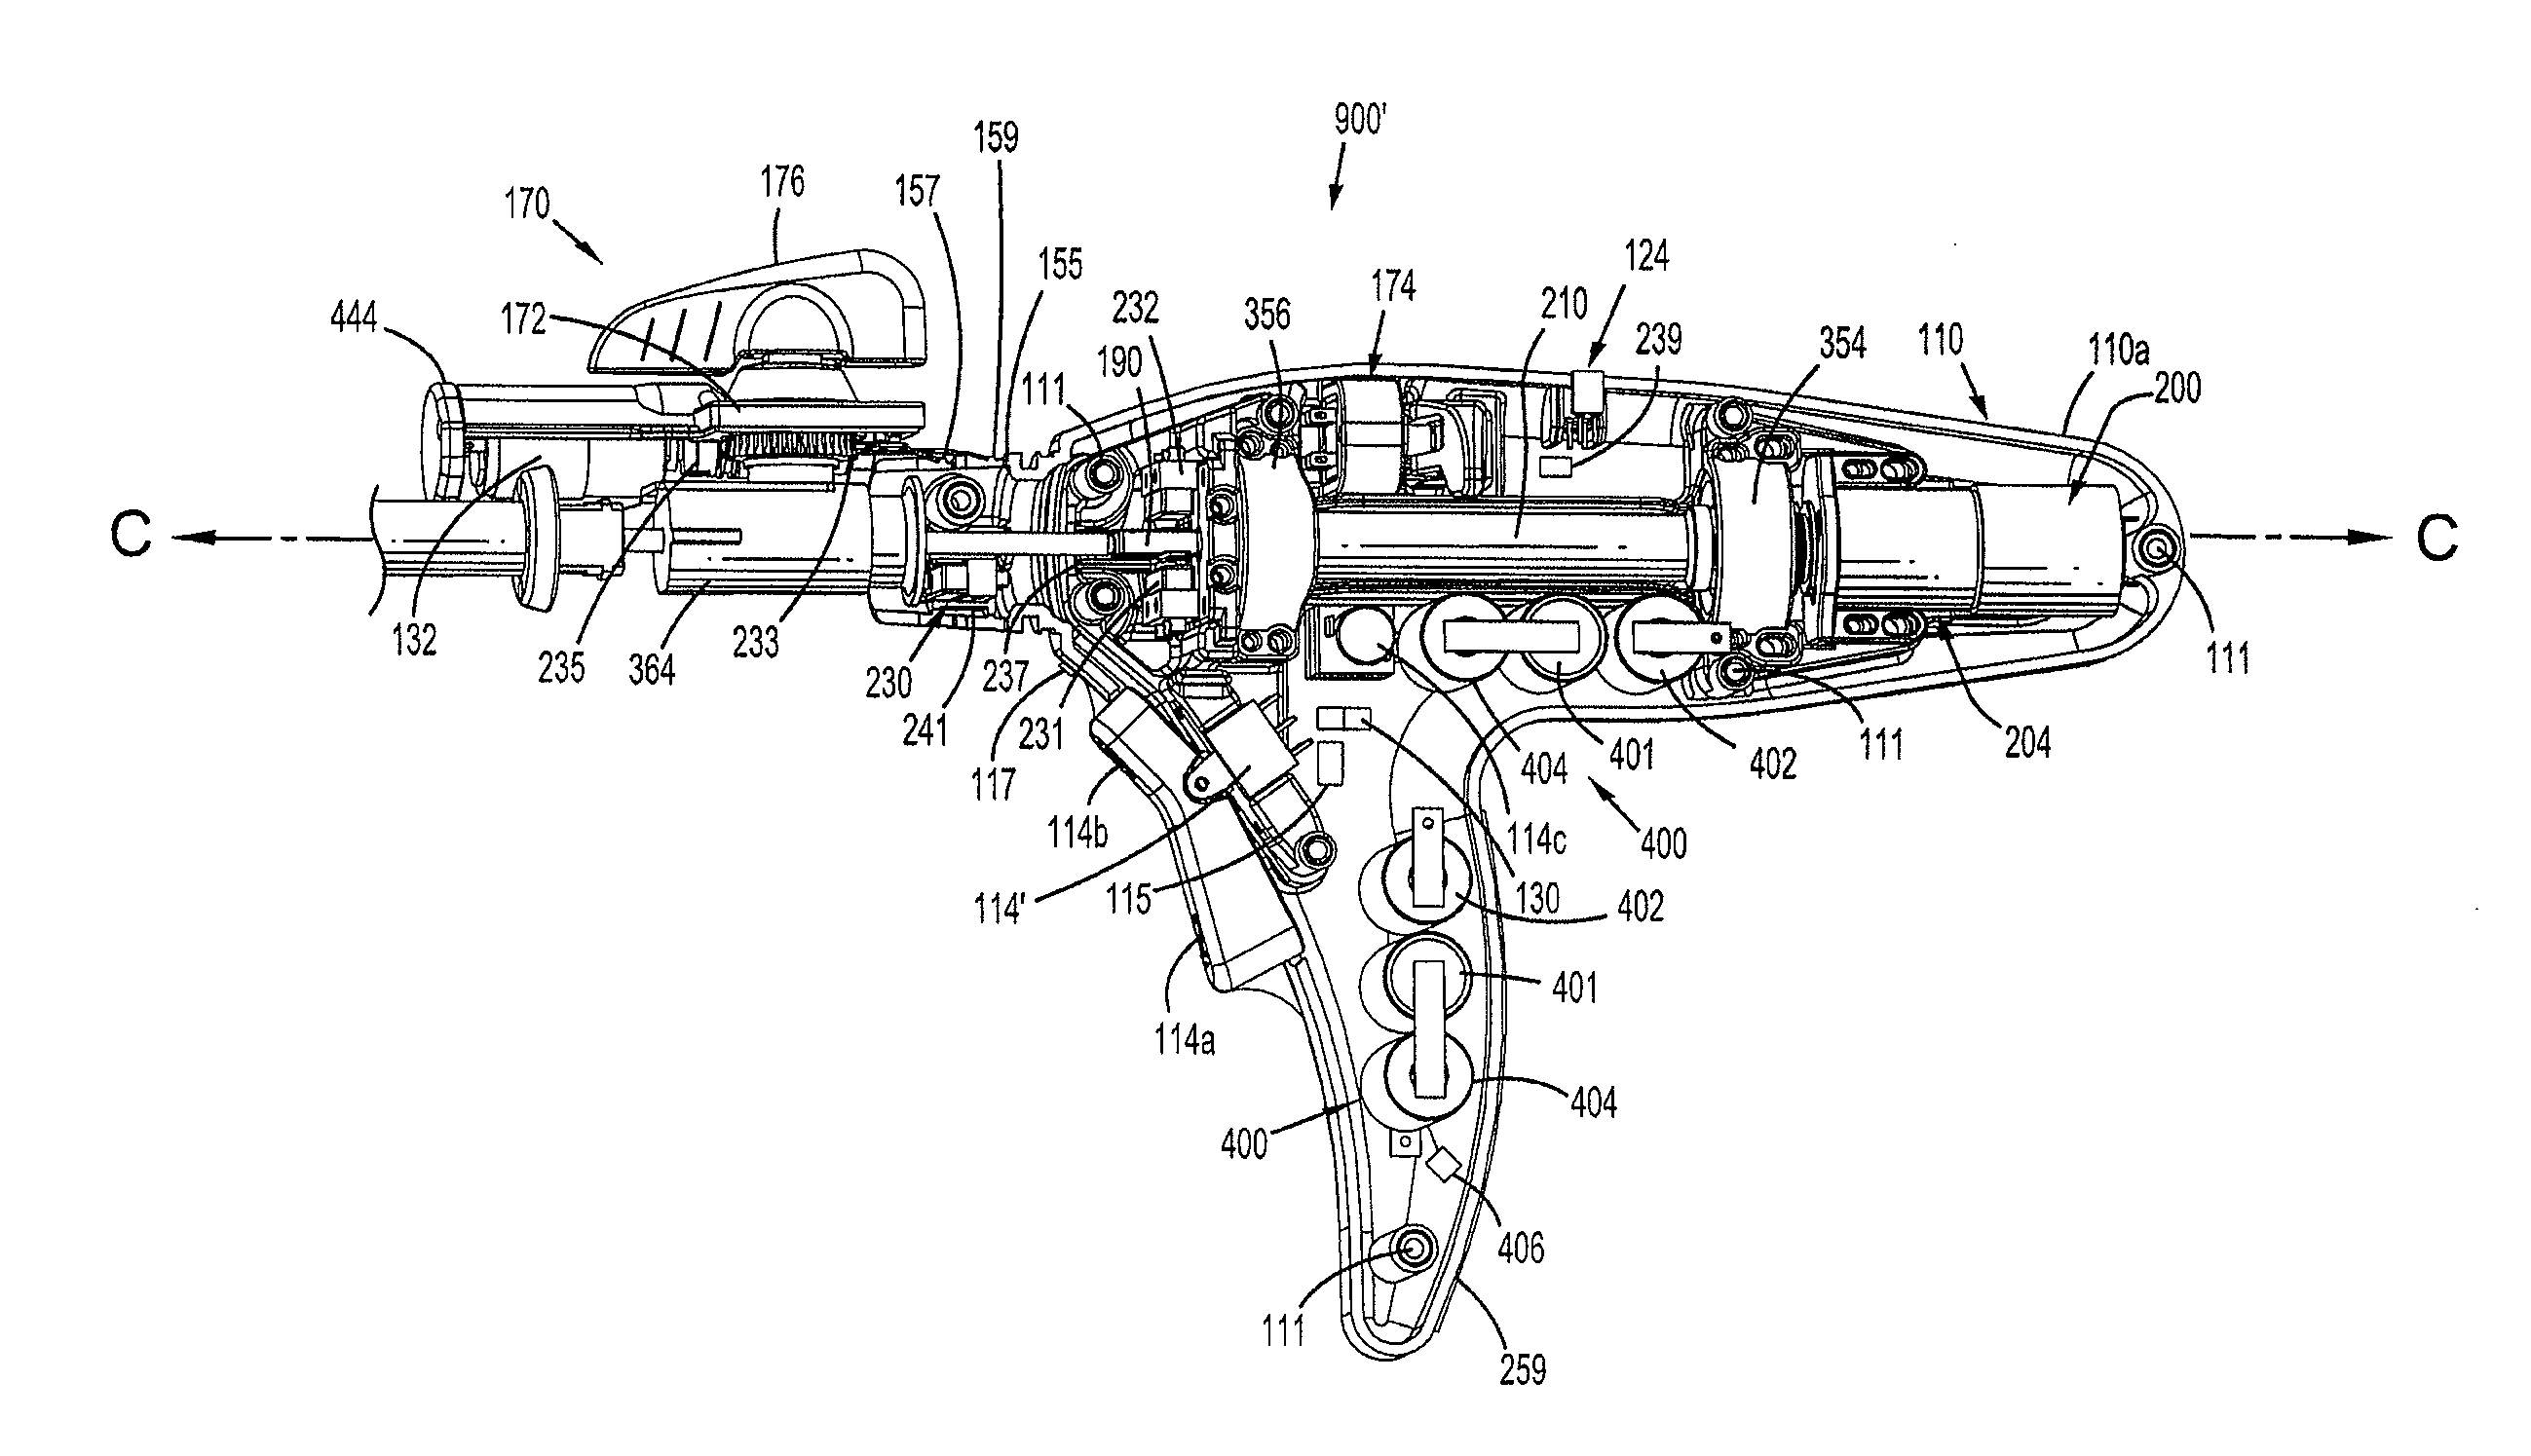 Internal backbone structural chassis for a surgical device